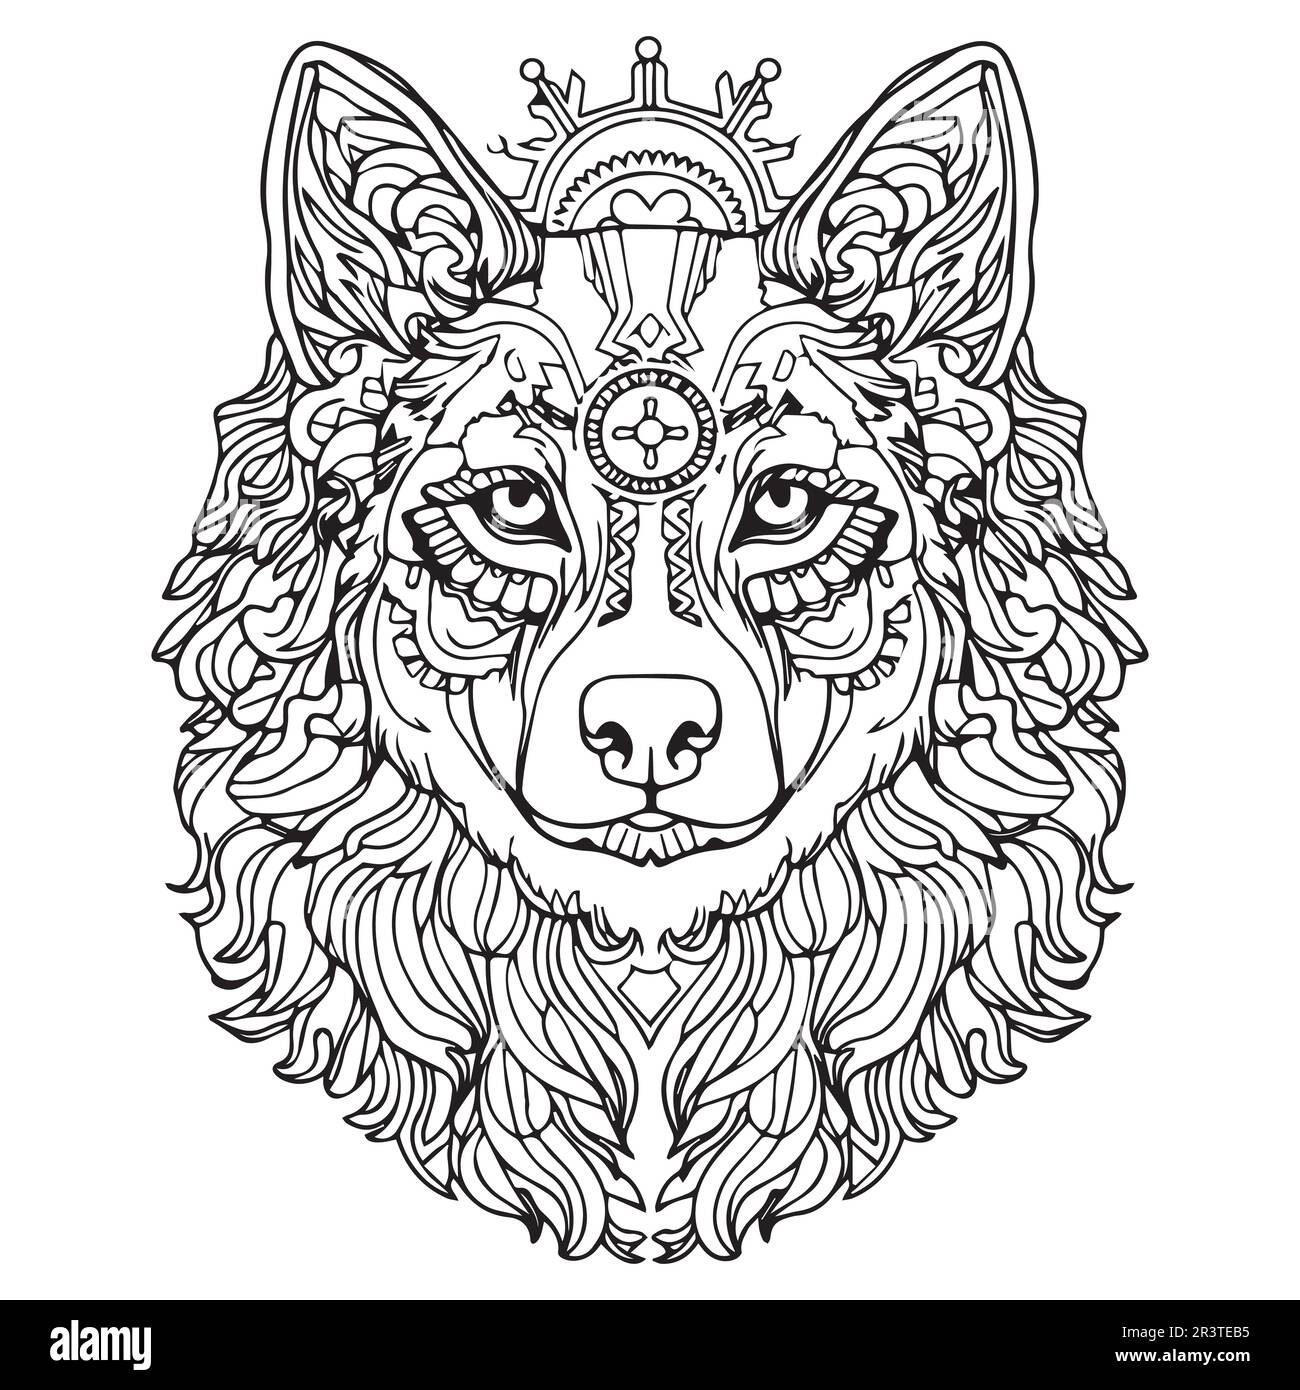 A line art wolf coloring book page vector illustration. Stock Vector